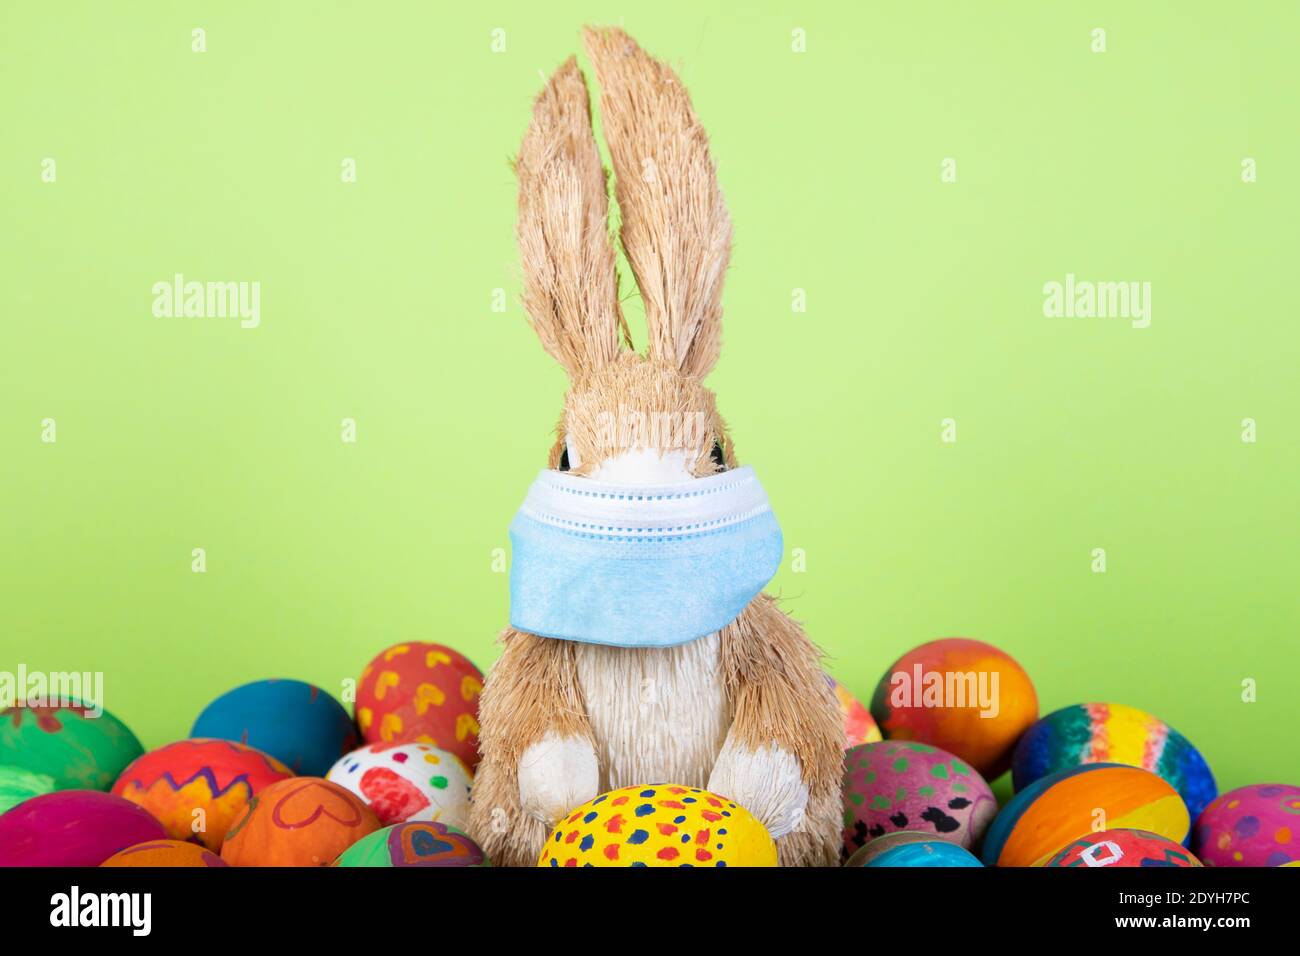 rabbit figurine with face mask between painted easter eggs before gren background, symbol for impact of corona virus on easter season Stock Photo